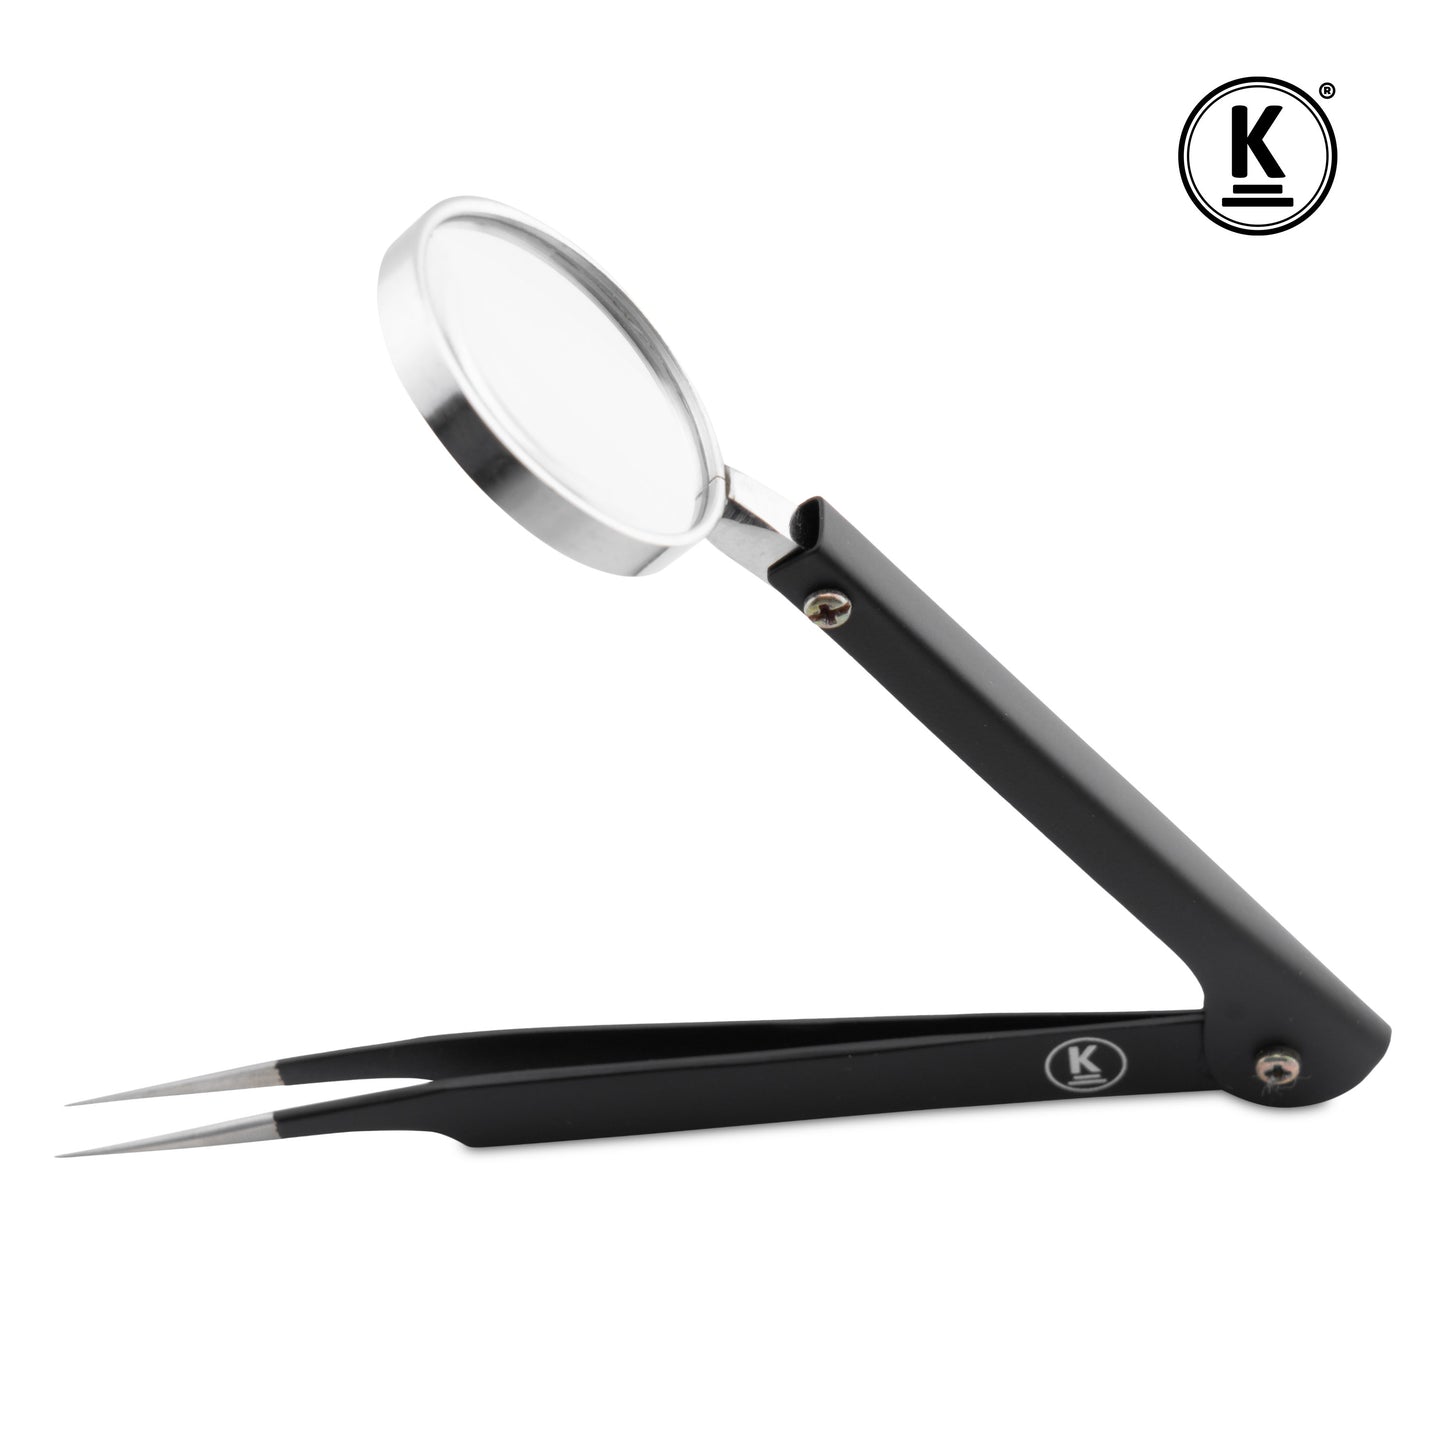 Tweezers with magnifying glass